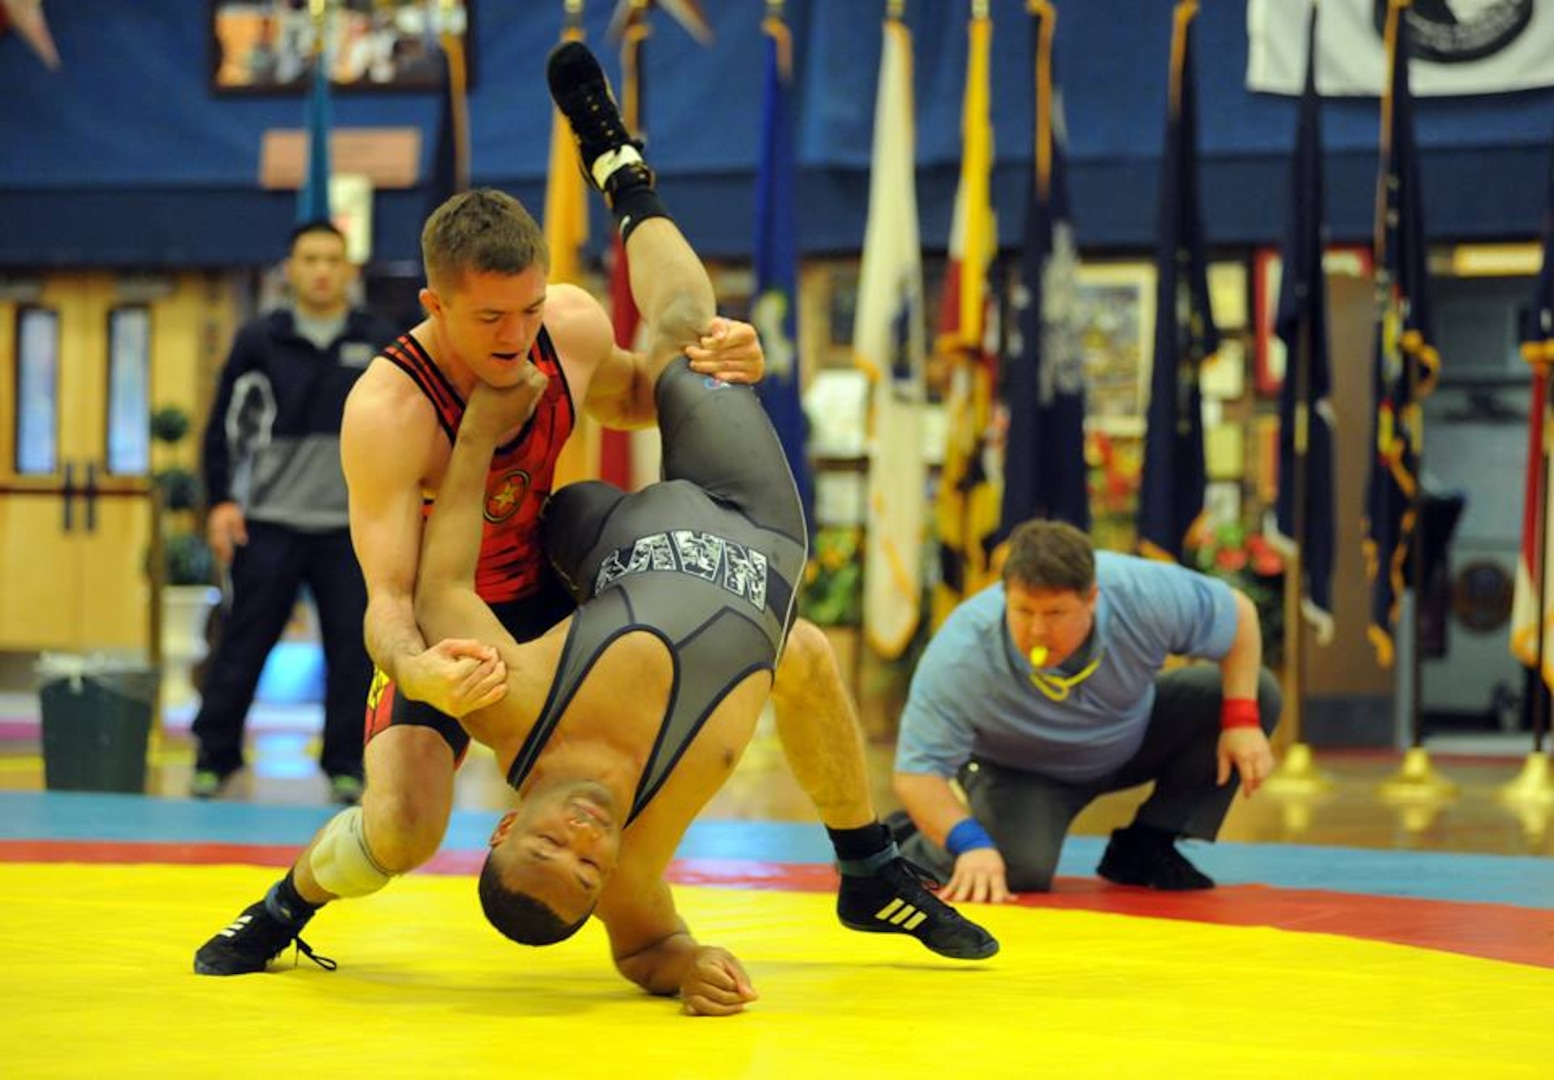 Sgt. Moza Fay (left) of the U.S. Army World Class Athlete Program pins Petty Officer 3 Ronald Latimer of the USS America at San Diego, California, in 24 seconds to help All-Army to a 35-4 victory over All-Navy in the opening freestyle session of the 2015 Armed Forces Wrestling Championships on Saturday at the Morale, Welfare and Recreation Special Events Center on Fort Carson, Colorado. U.S. Army photo by Tim Hipps, IMCOM Public Affairs